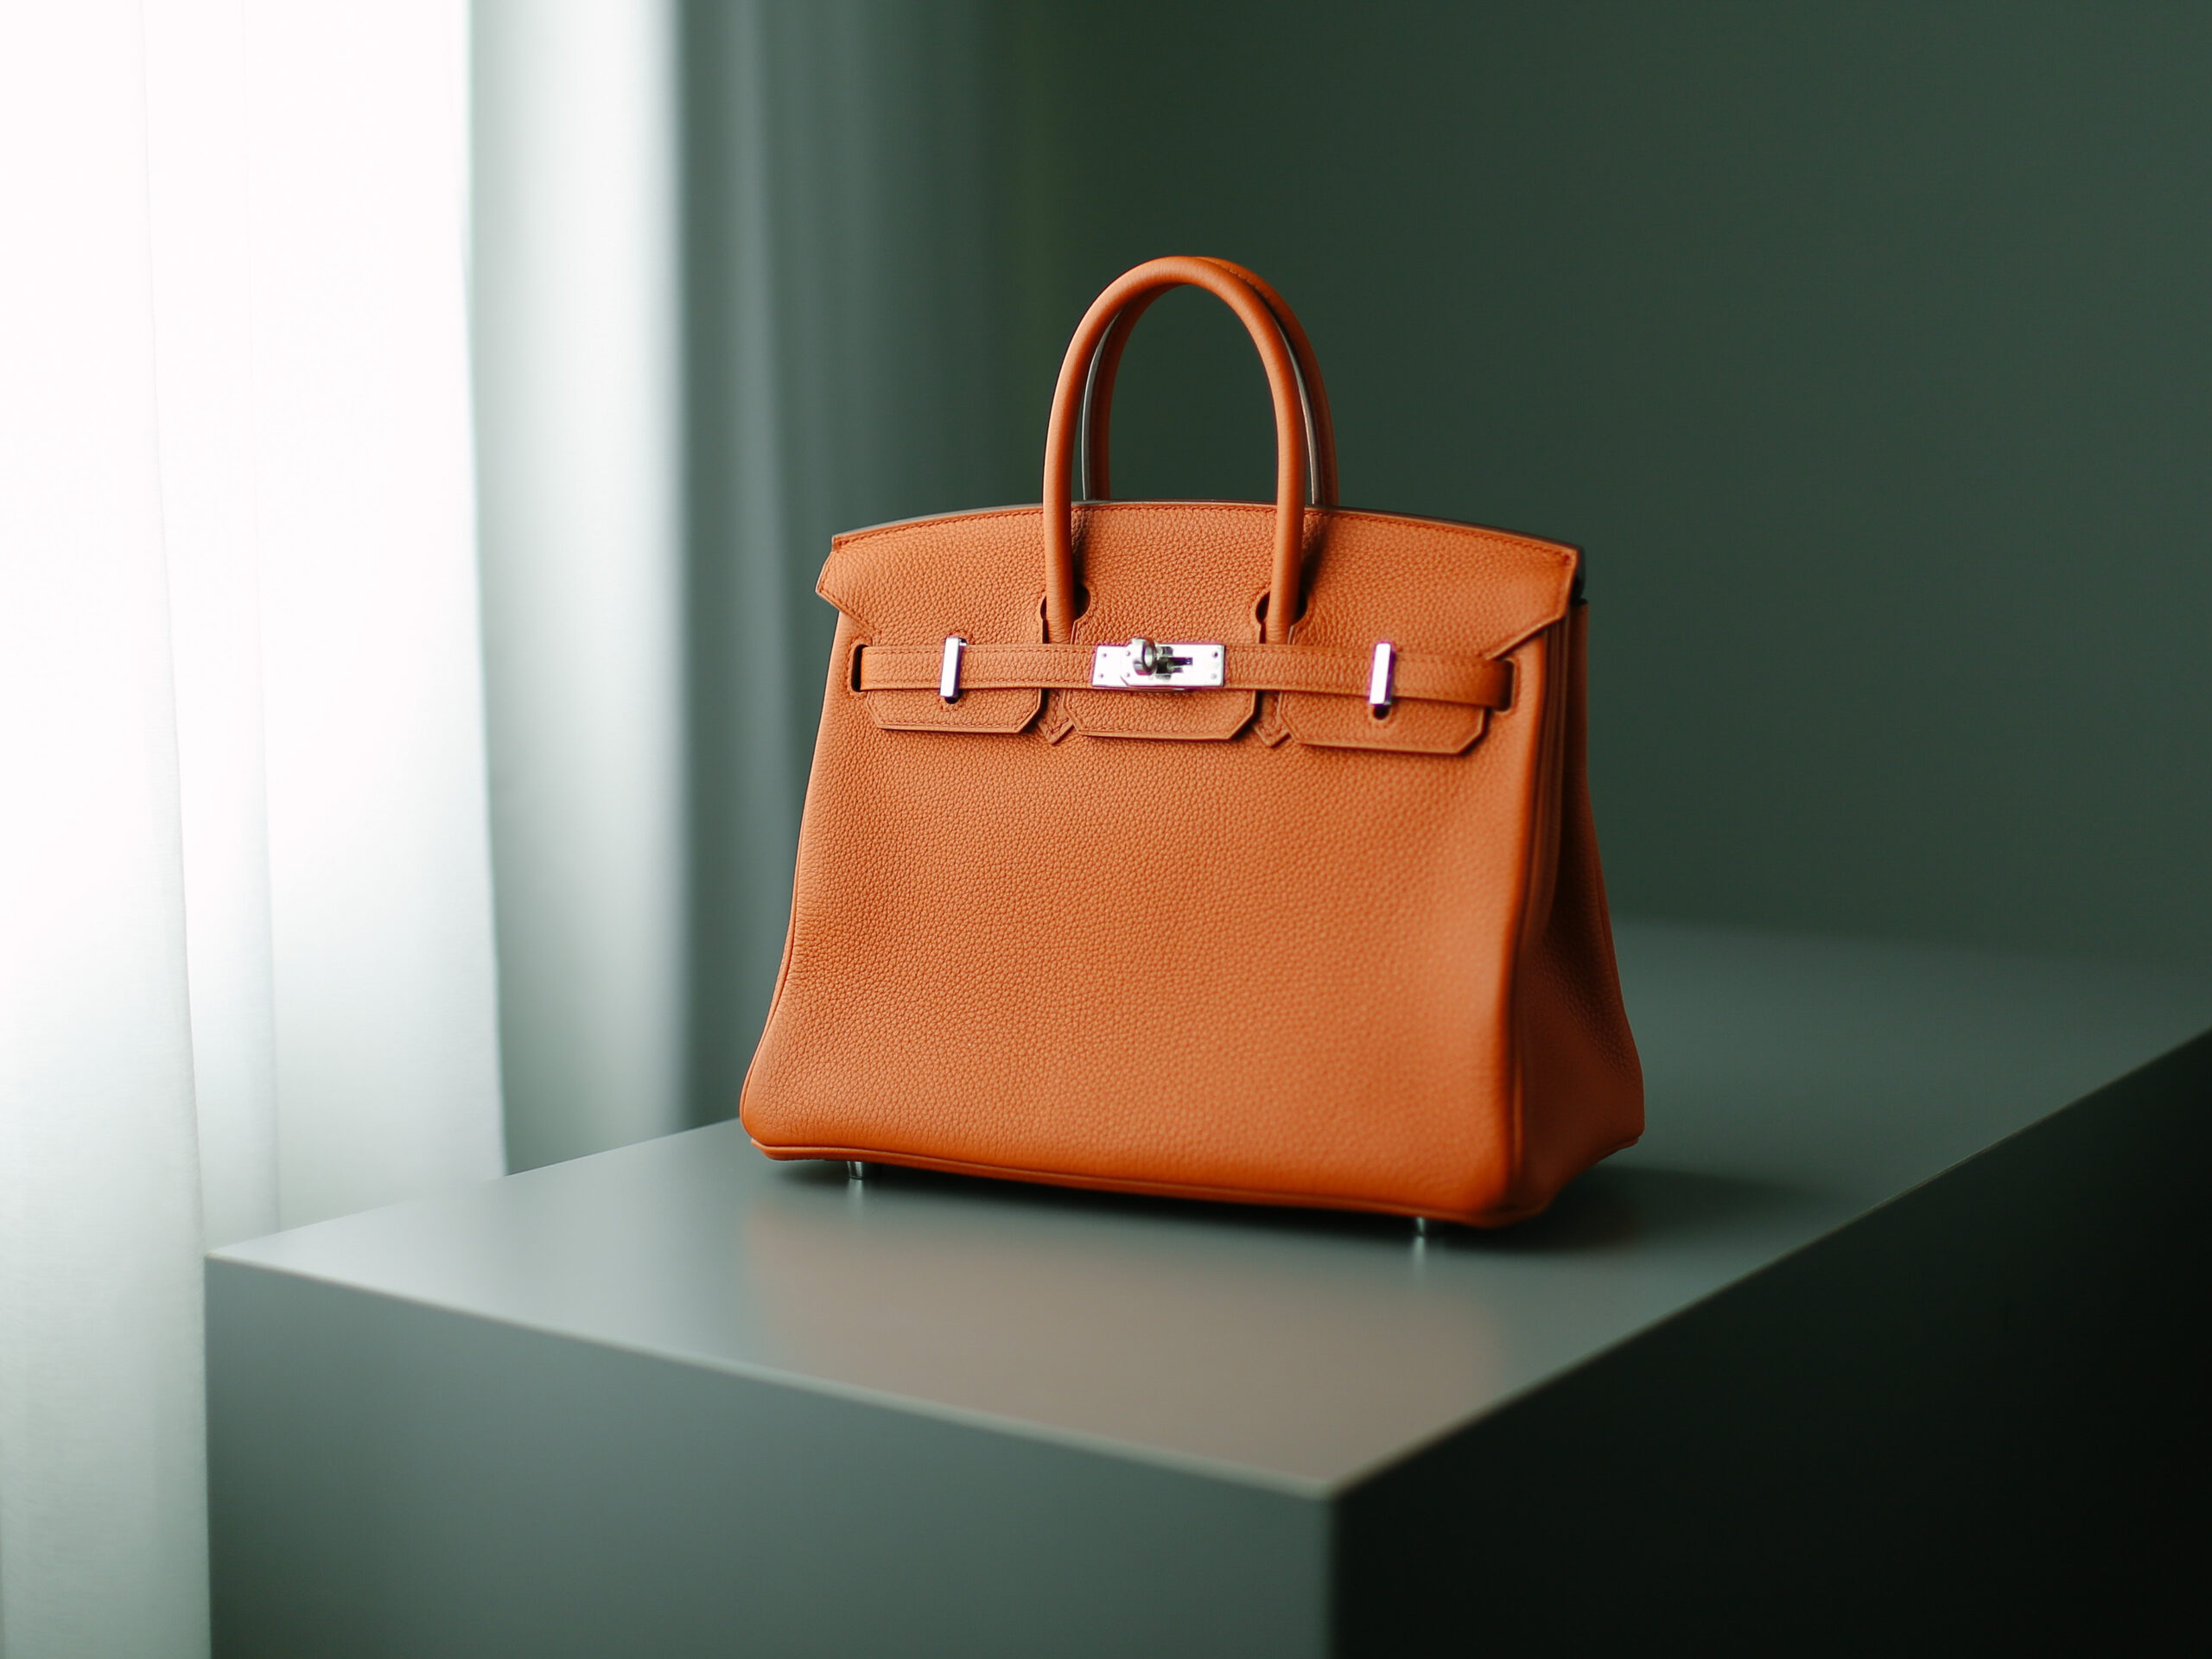 What Bag Colour Is Popular For 2019?